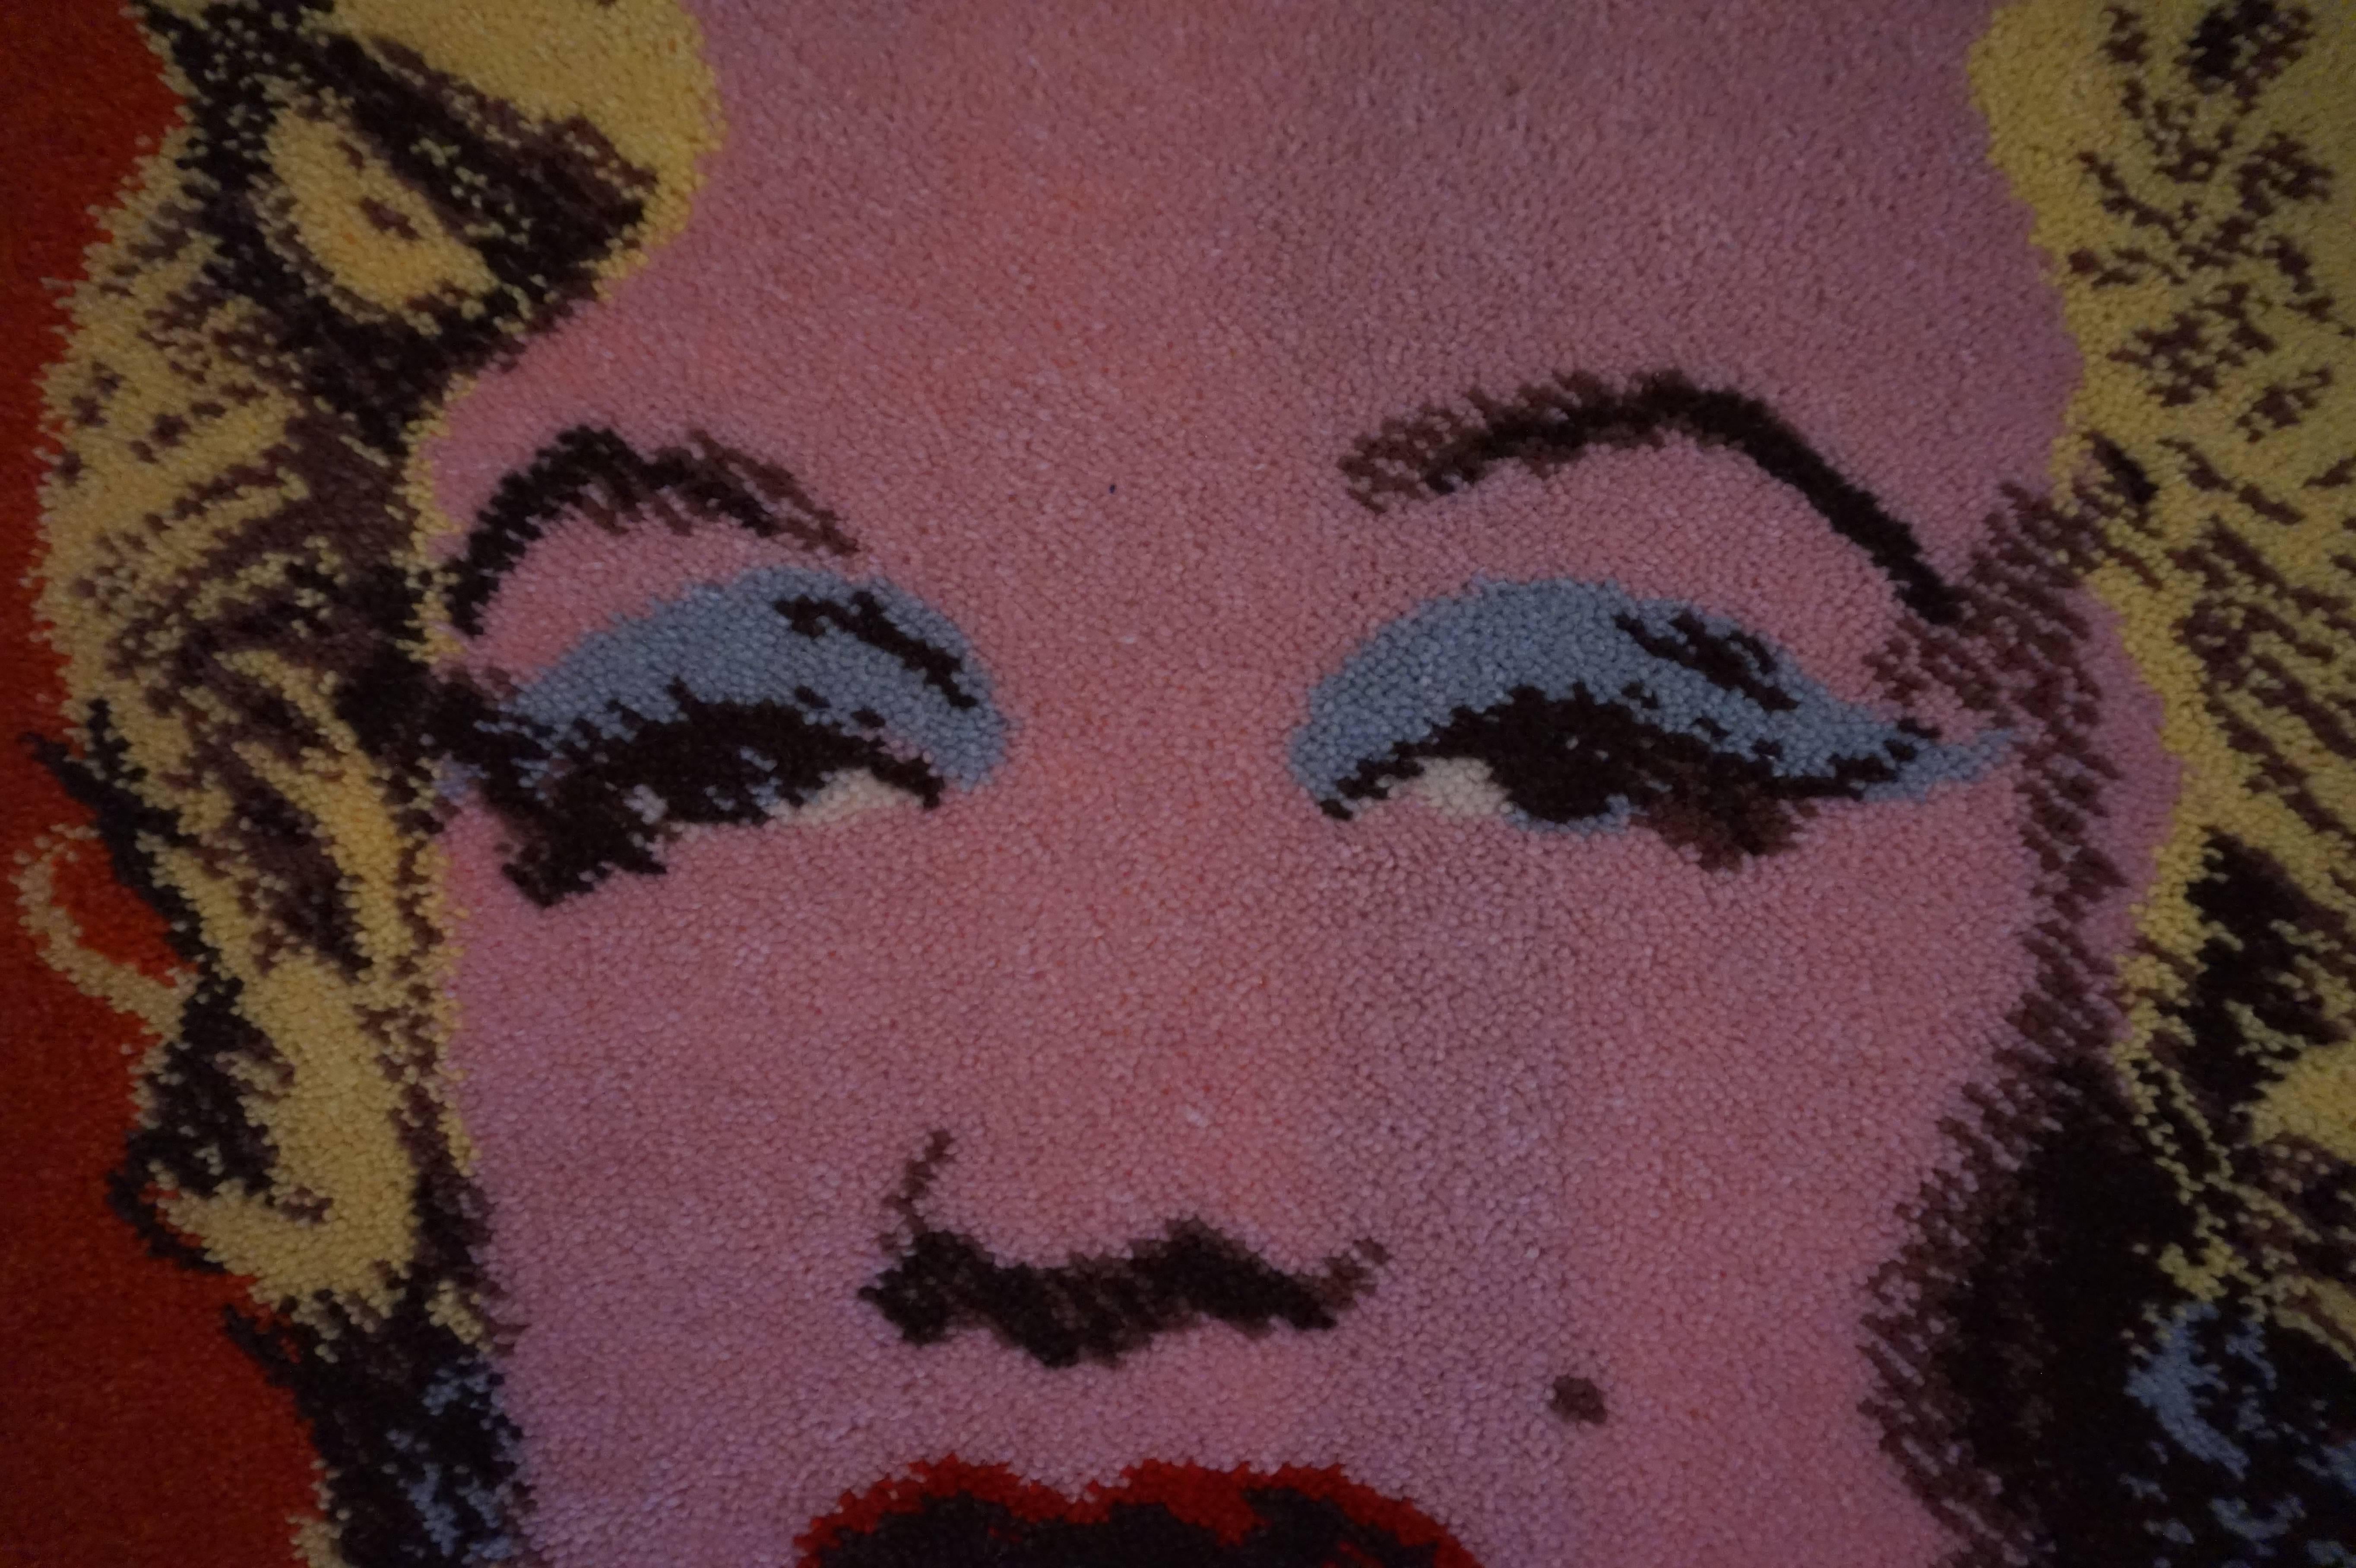 Ege Art rug designed in the style of Andy Warhol depicts his famous Marilyn Monroe imagery.  Warhol is one of the most important and celebrated American artists of the 20th century. This rug was used as a wall hanging and still retains its wooden